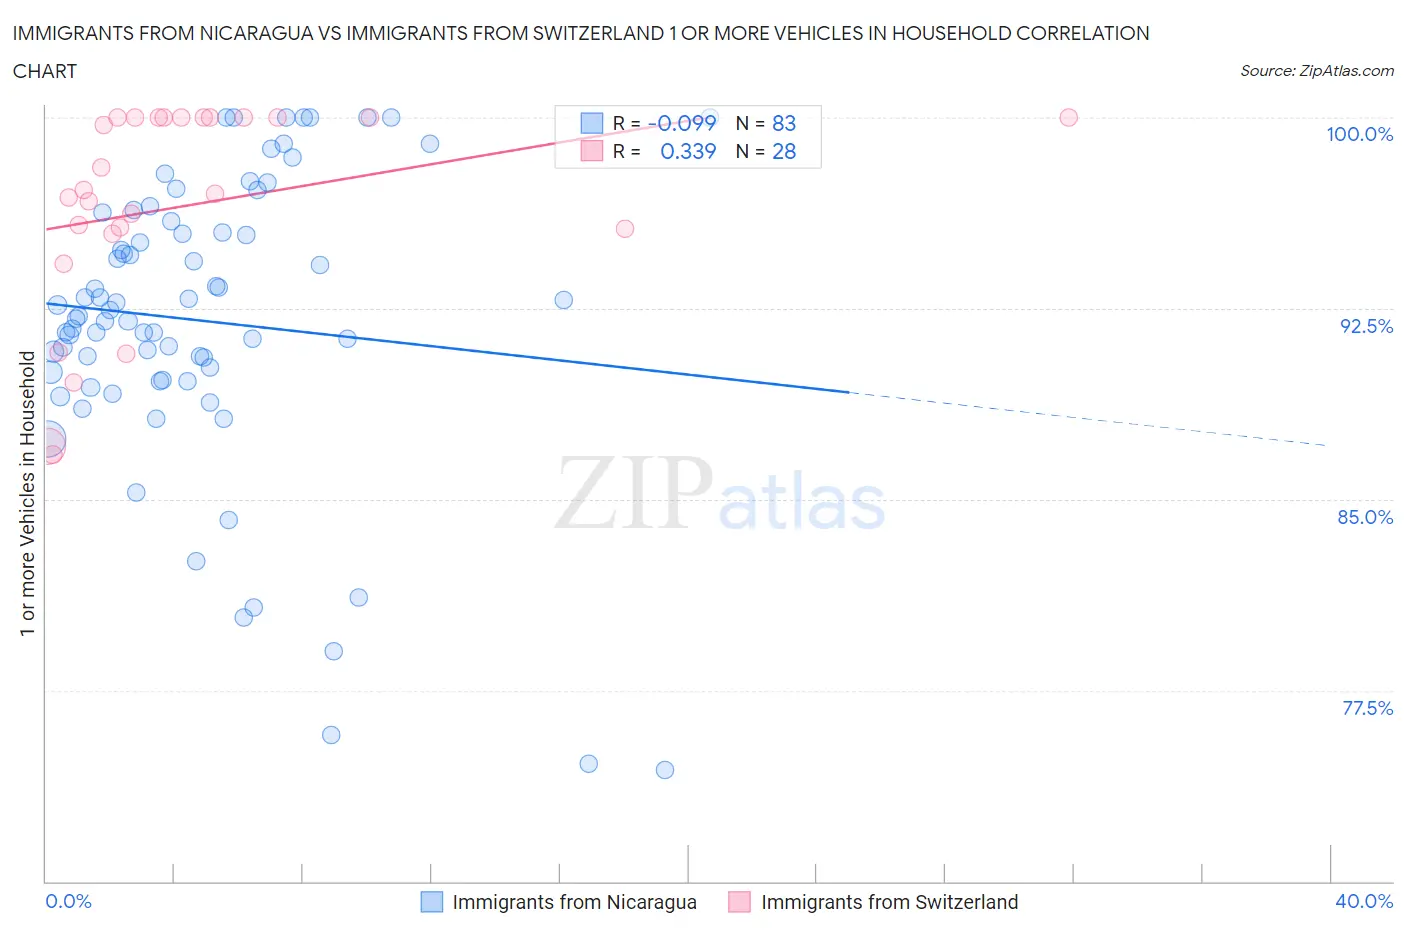 Immigrants from Nicaragua vs Immigrants from Switzerland 1 or more Vehicles in Household